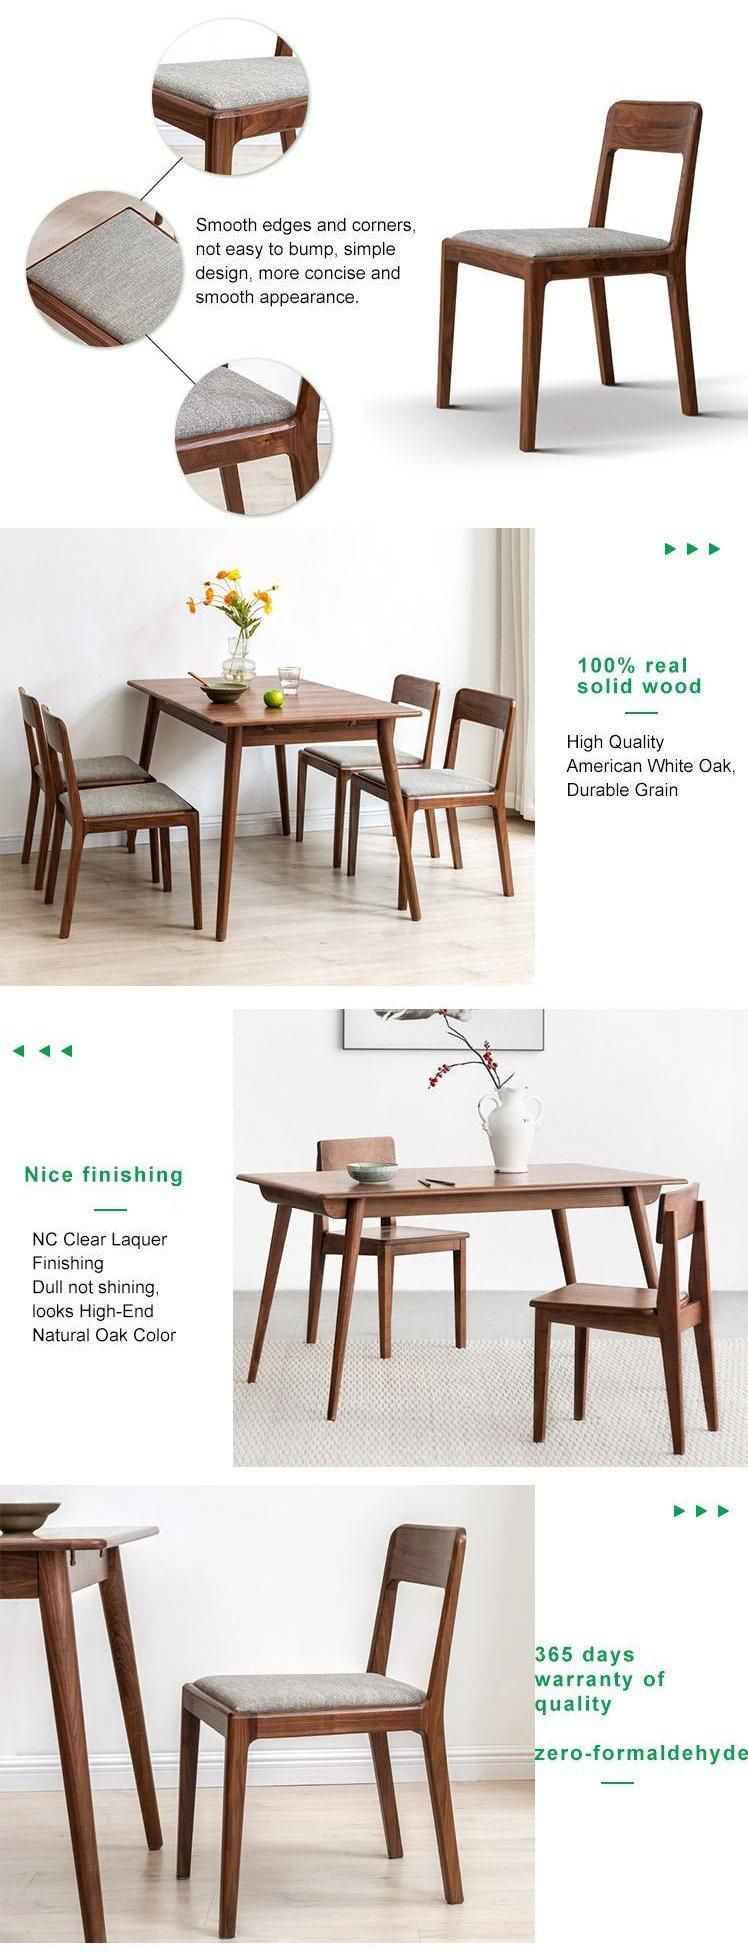 Furniture Modern Furniture Chair Home Furniture Wood Furniture New Design Modern Nordic Home Upholstered Cafe Low Back Dining Chair with Brown Wooden Leg